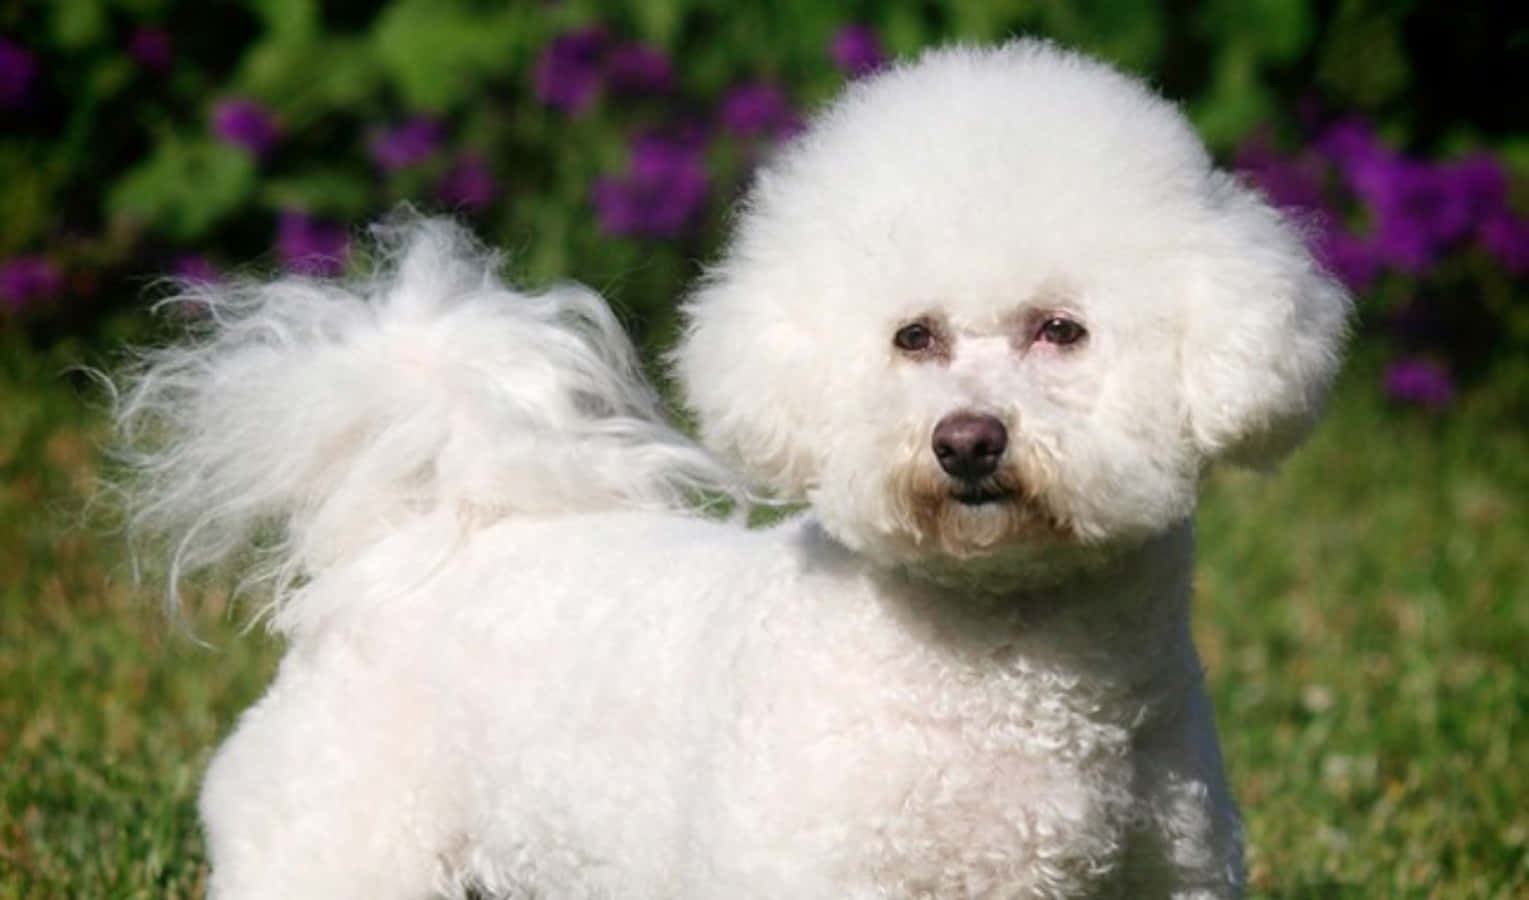 Adorable Bichon Frise Showing off His Fluffy Fur